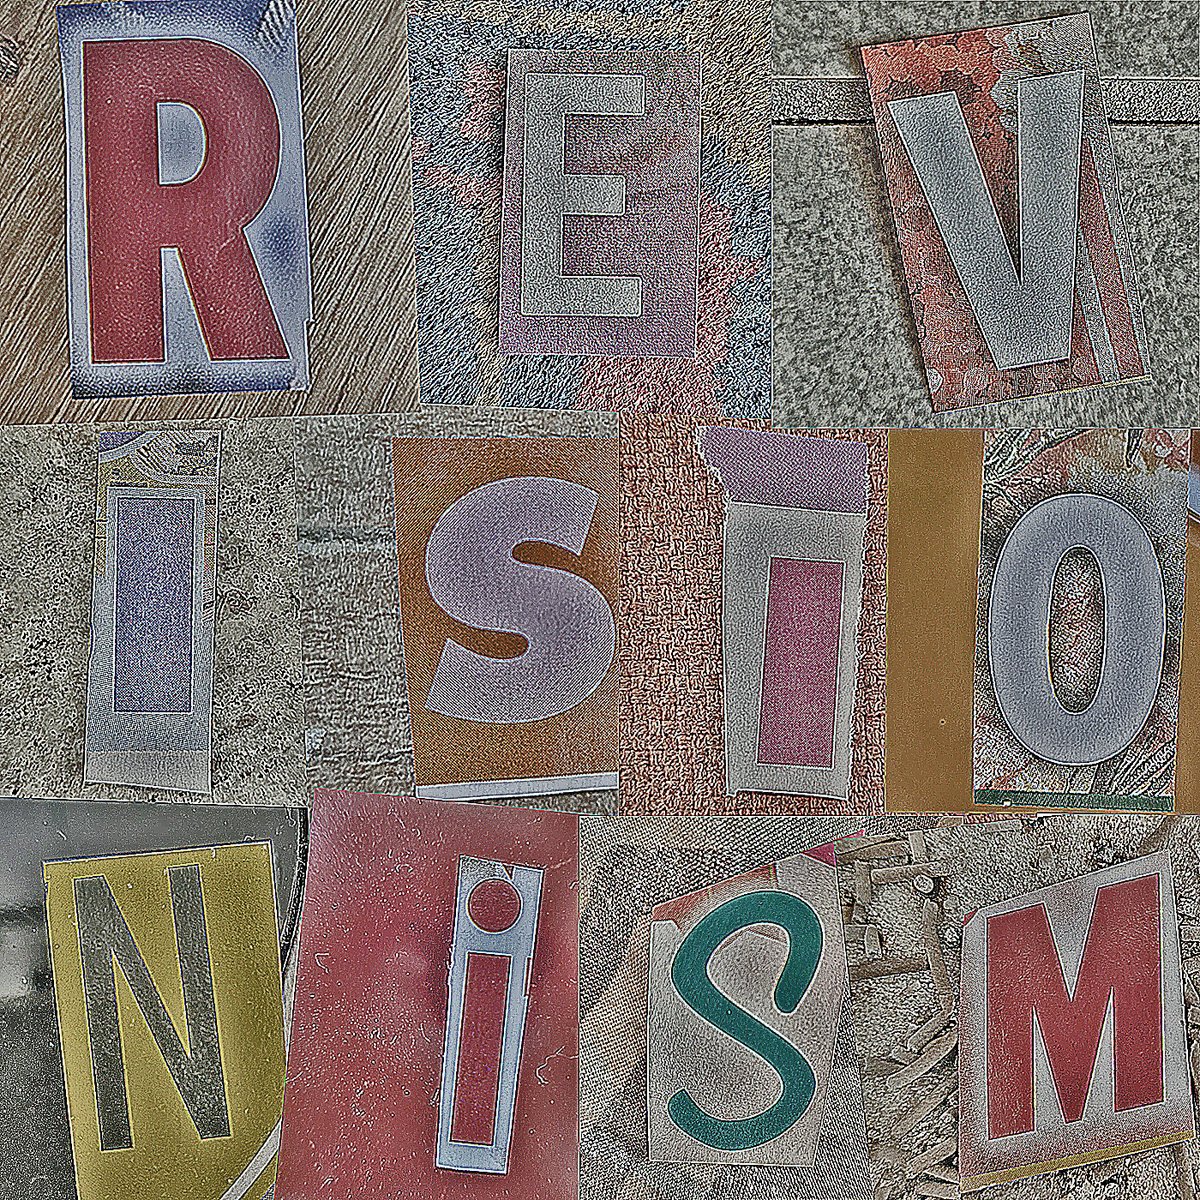 Sam Cagney - "Revisionism" [Recorded & Mixed (JB), Mastered (JP)]